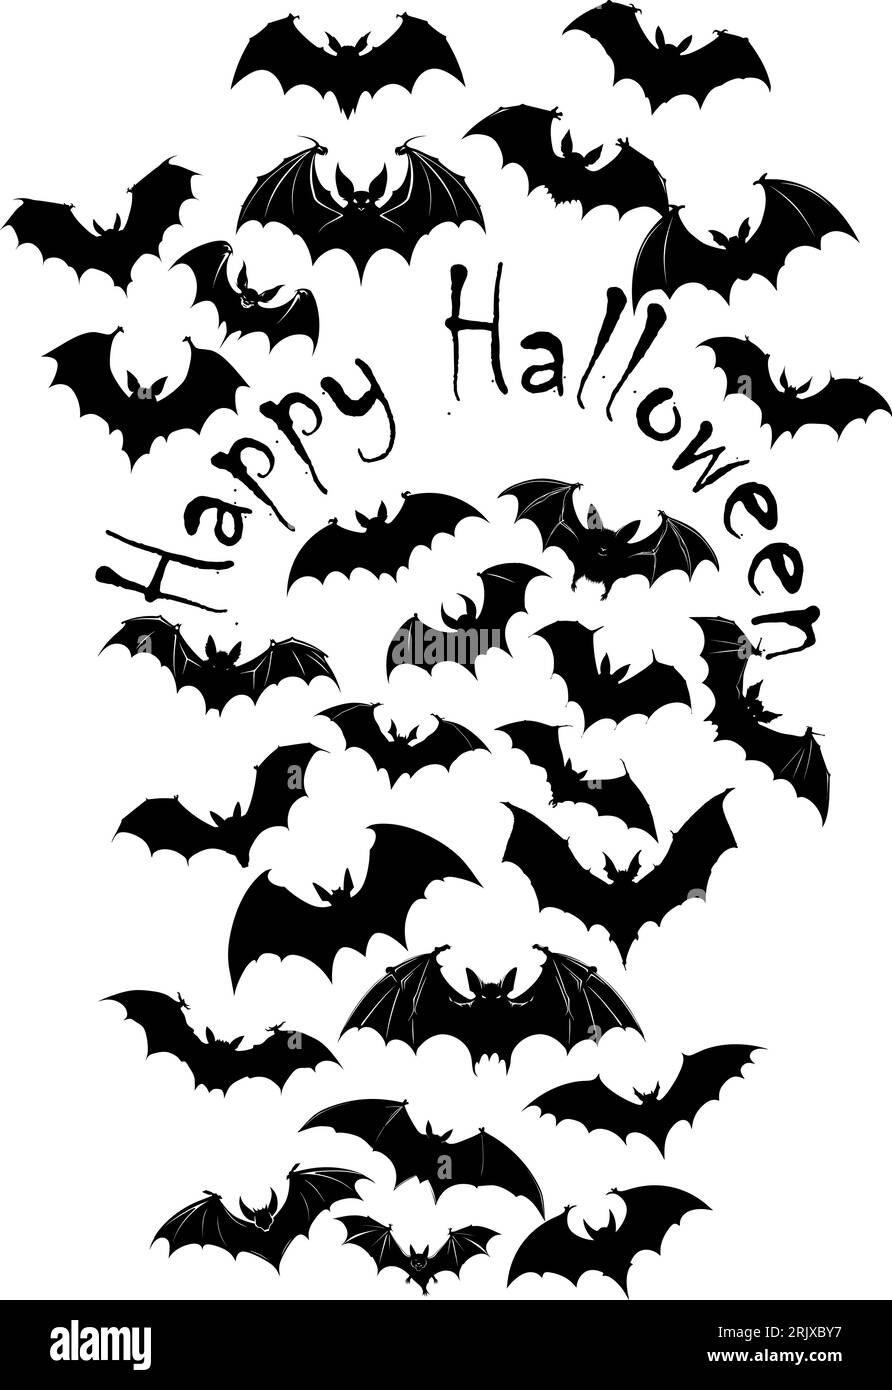 Horrific black bats swarm isolated on white vector Halloween background. Flying fox night creatures illustration. Silhouettes of flying bats Stock Vector